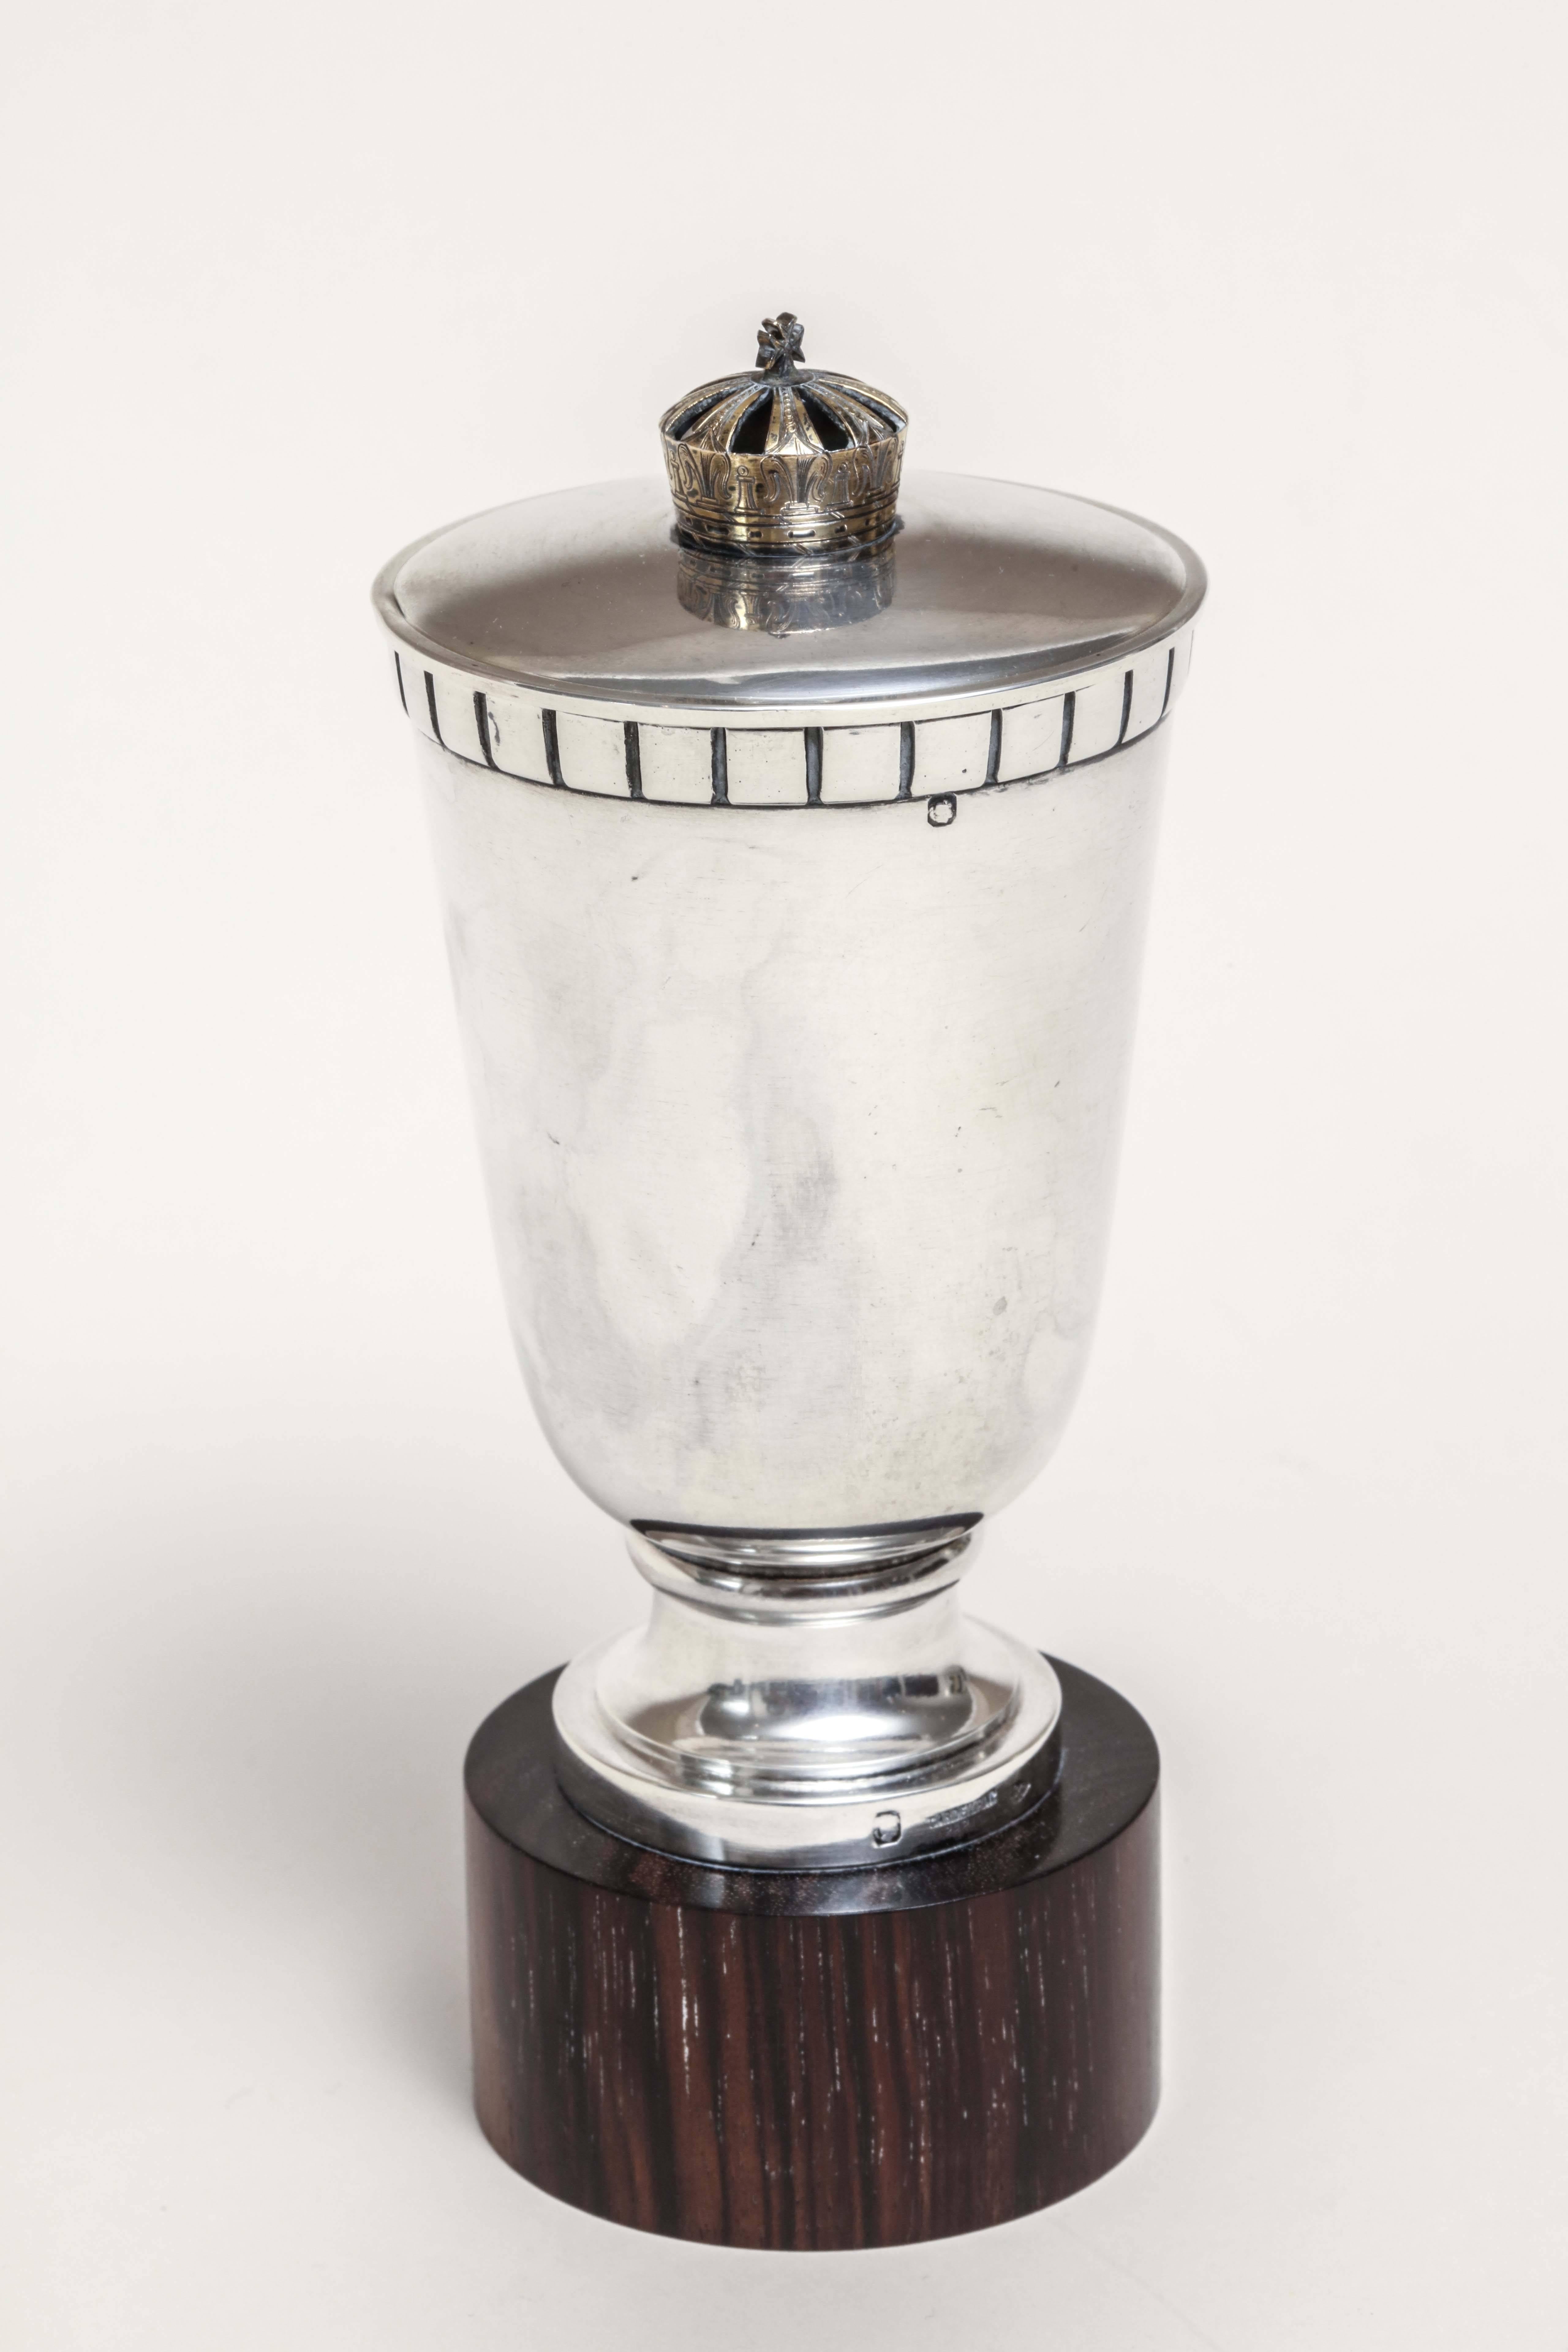 Maison Cardeilhac French Art Deco Sterling Silver Royal Bulgarian Trophy In Excellent Condition For Sale In New York, NY